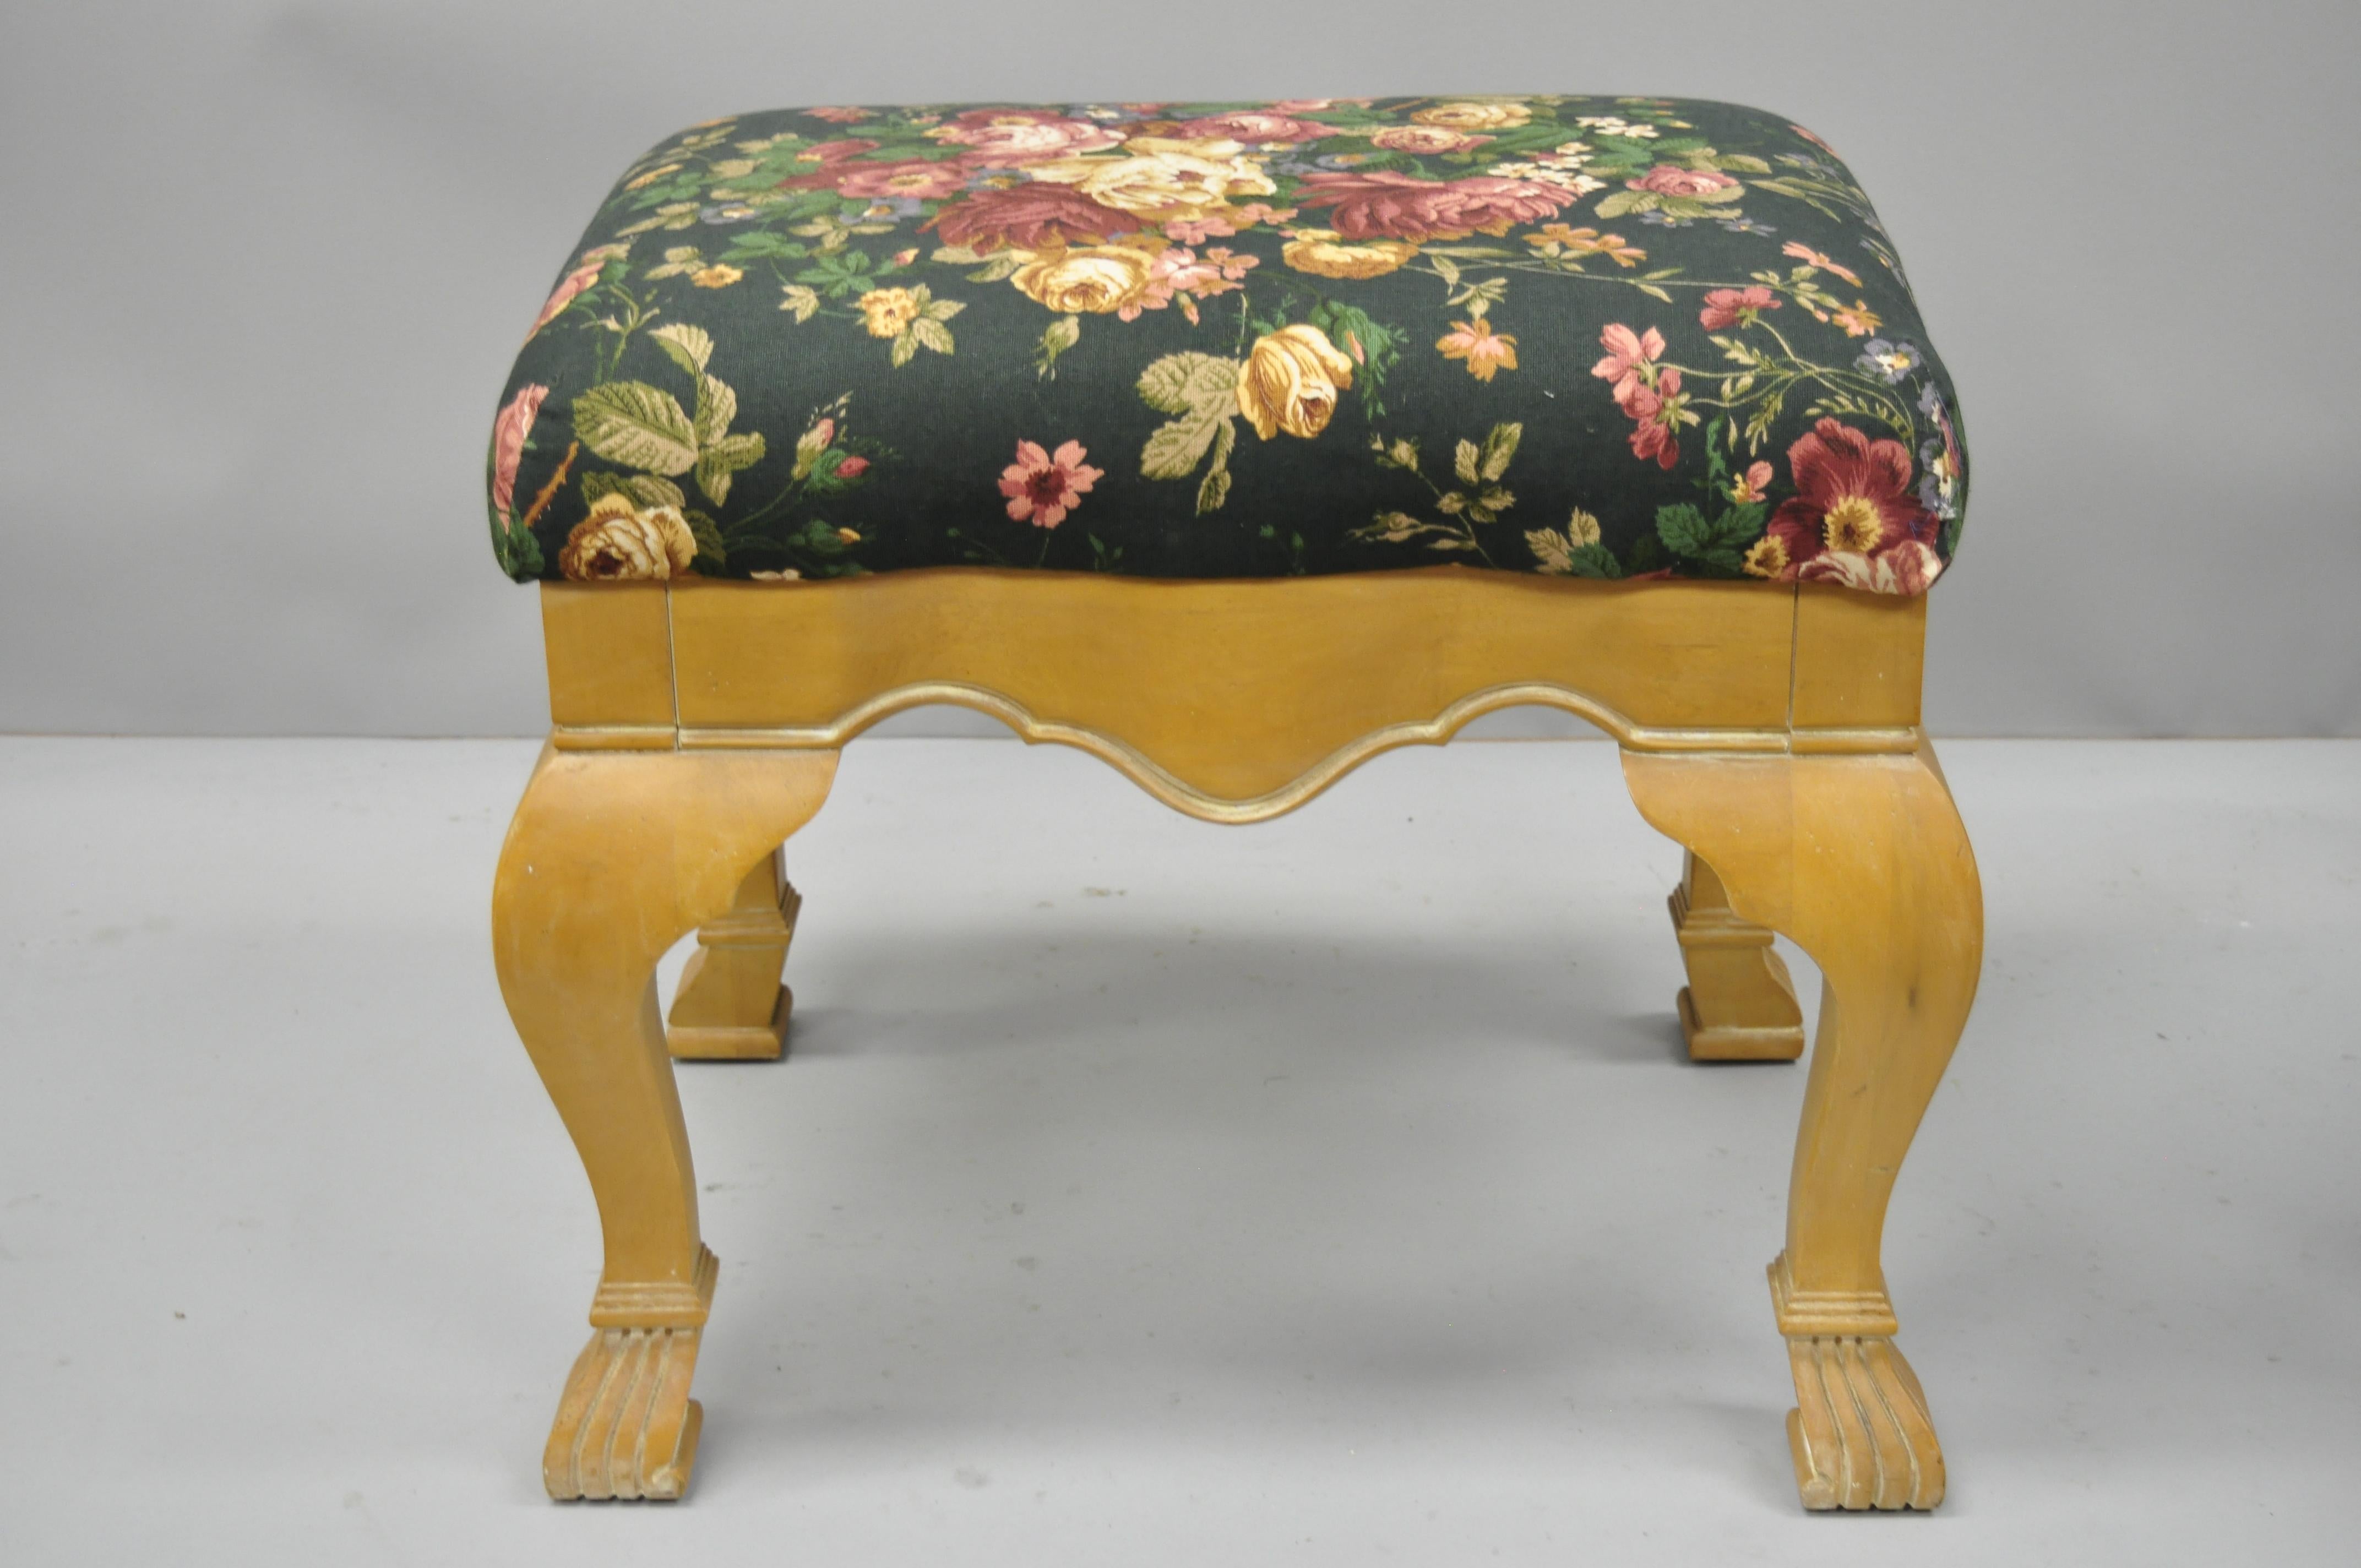 Pair of Country French Style Cabriole Leg Hoof Foot Upholstered Stools Benches For Sale 2